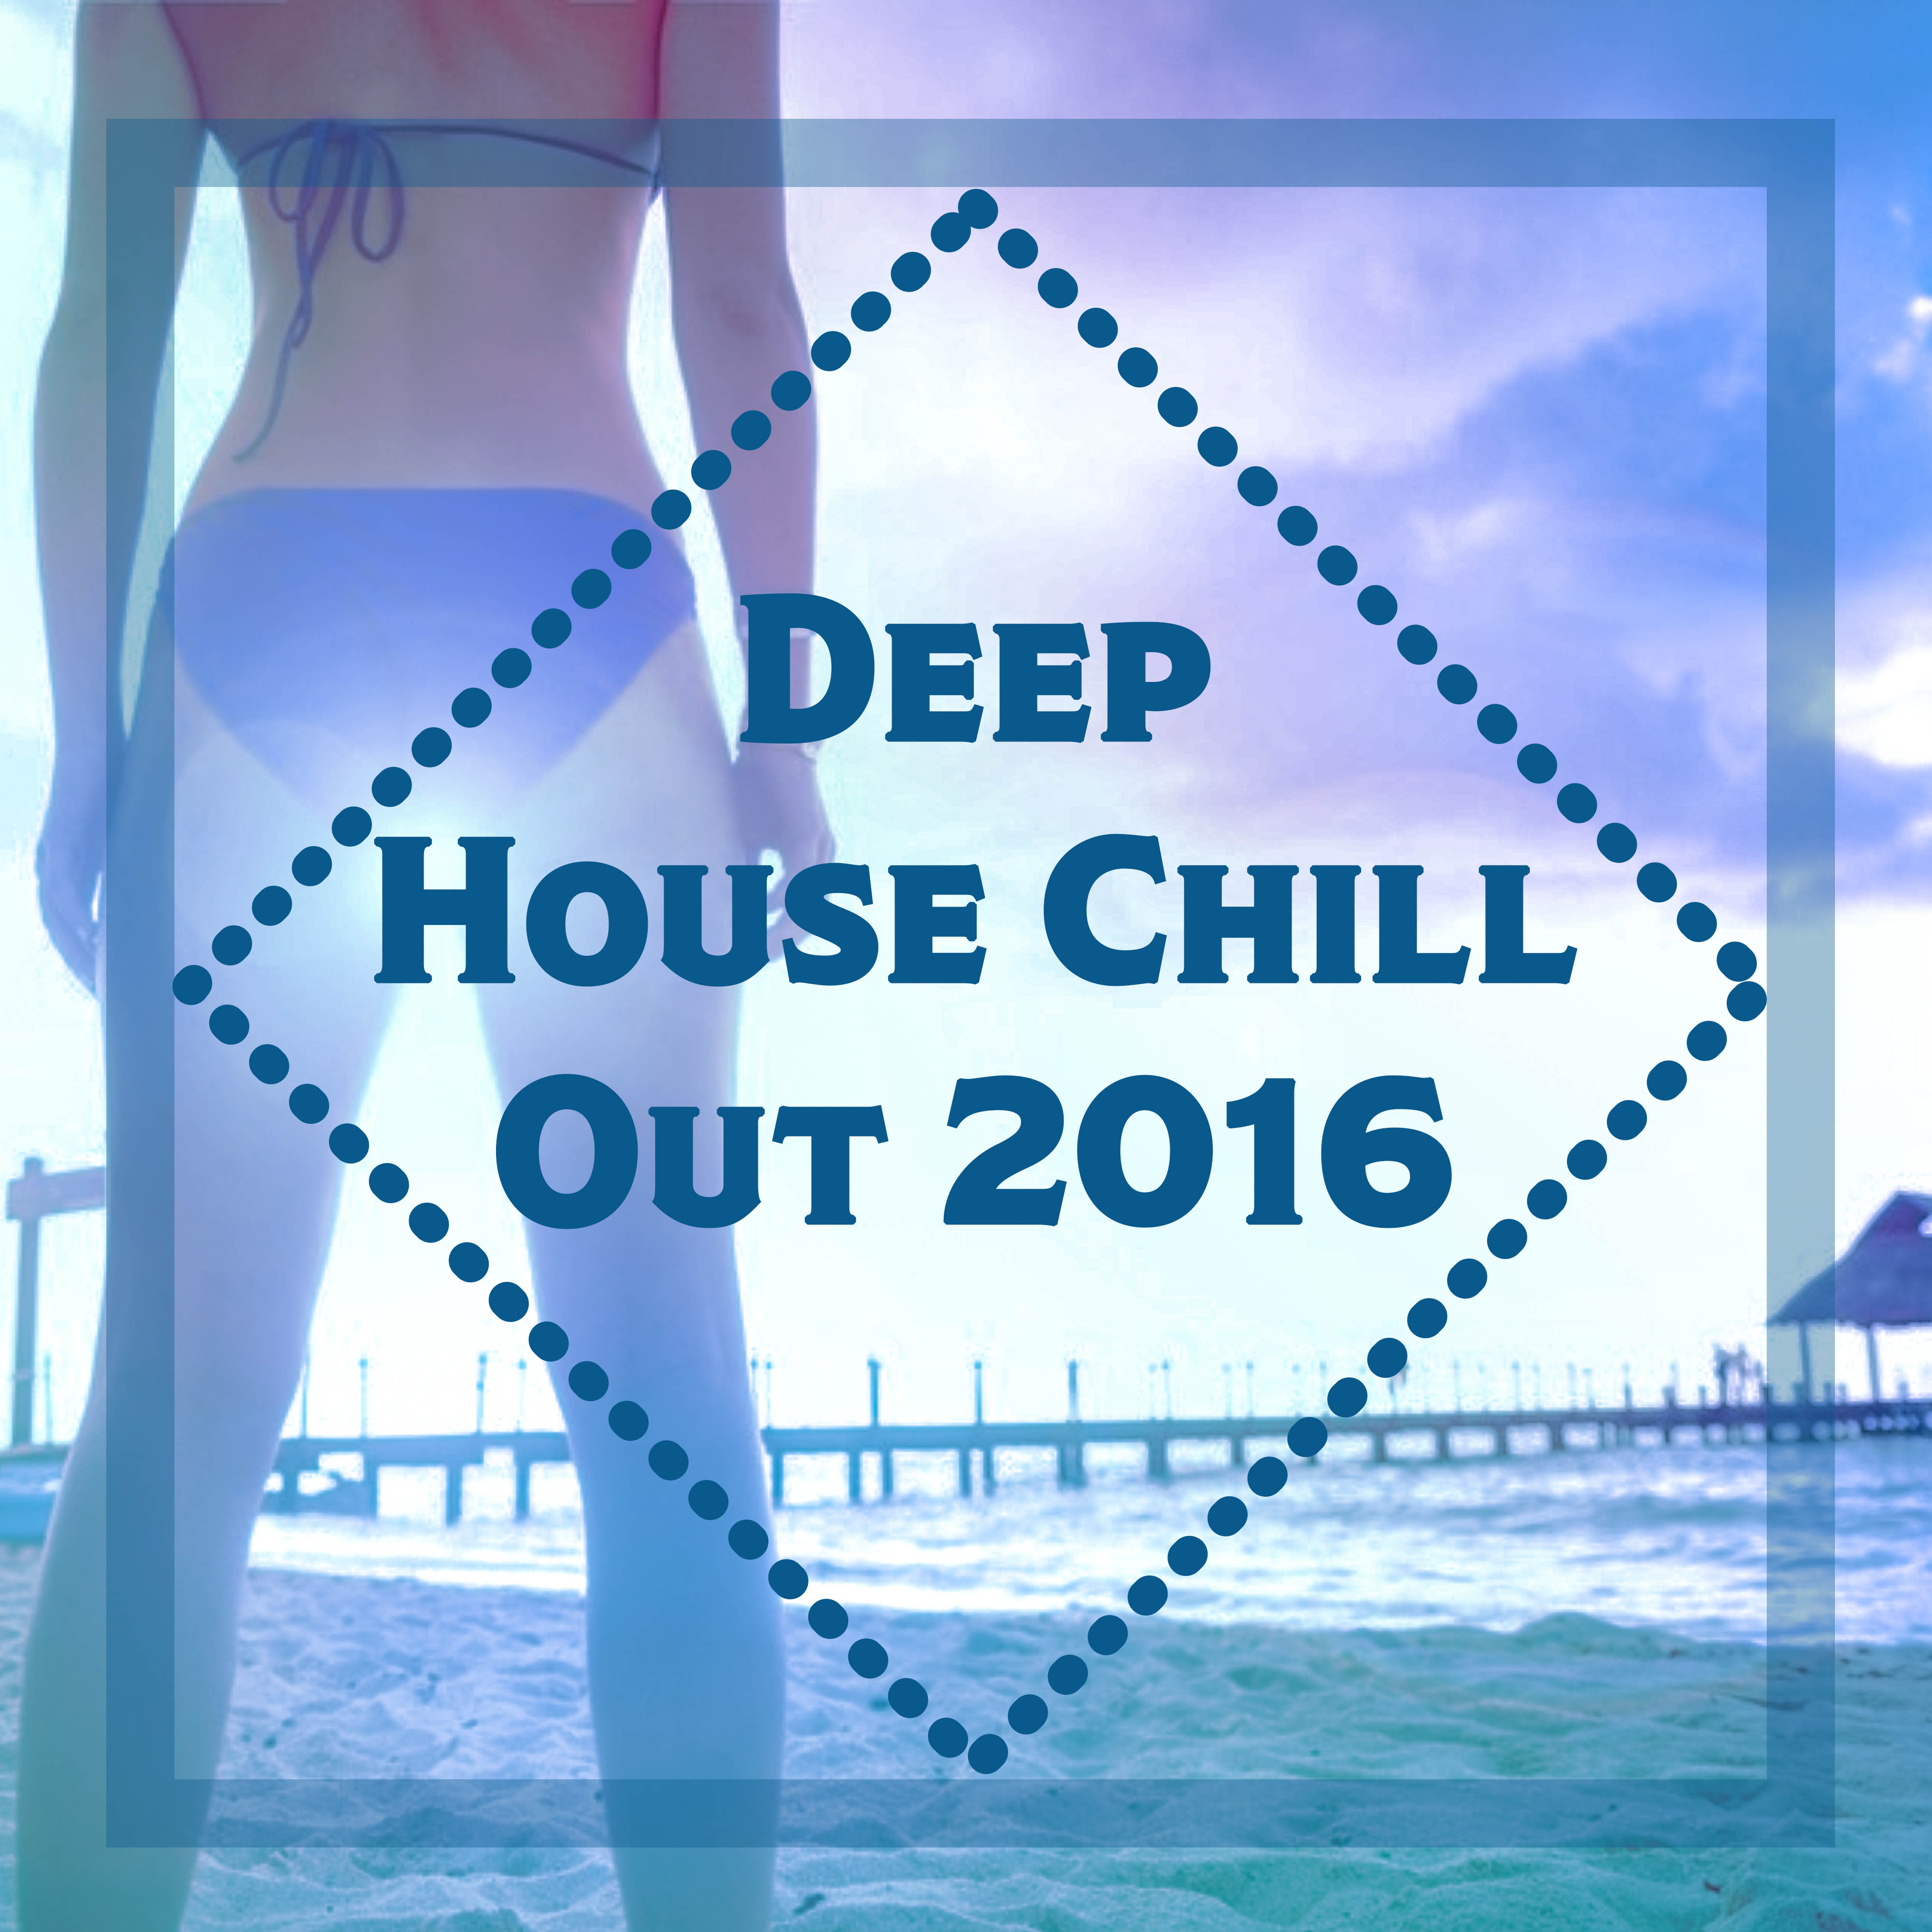 Deep House Chill Out 2016 – Best Chill Out Hits 2016, Ibiza Party, Summer Music 2016, Beach Chill Out, Deep Vibes, Tropic Chill Out Music, Summer Love